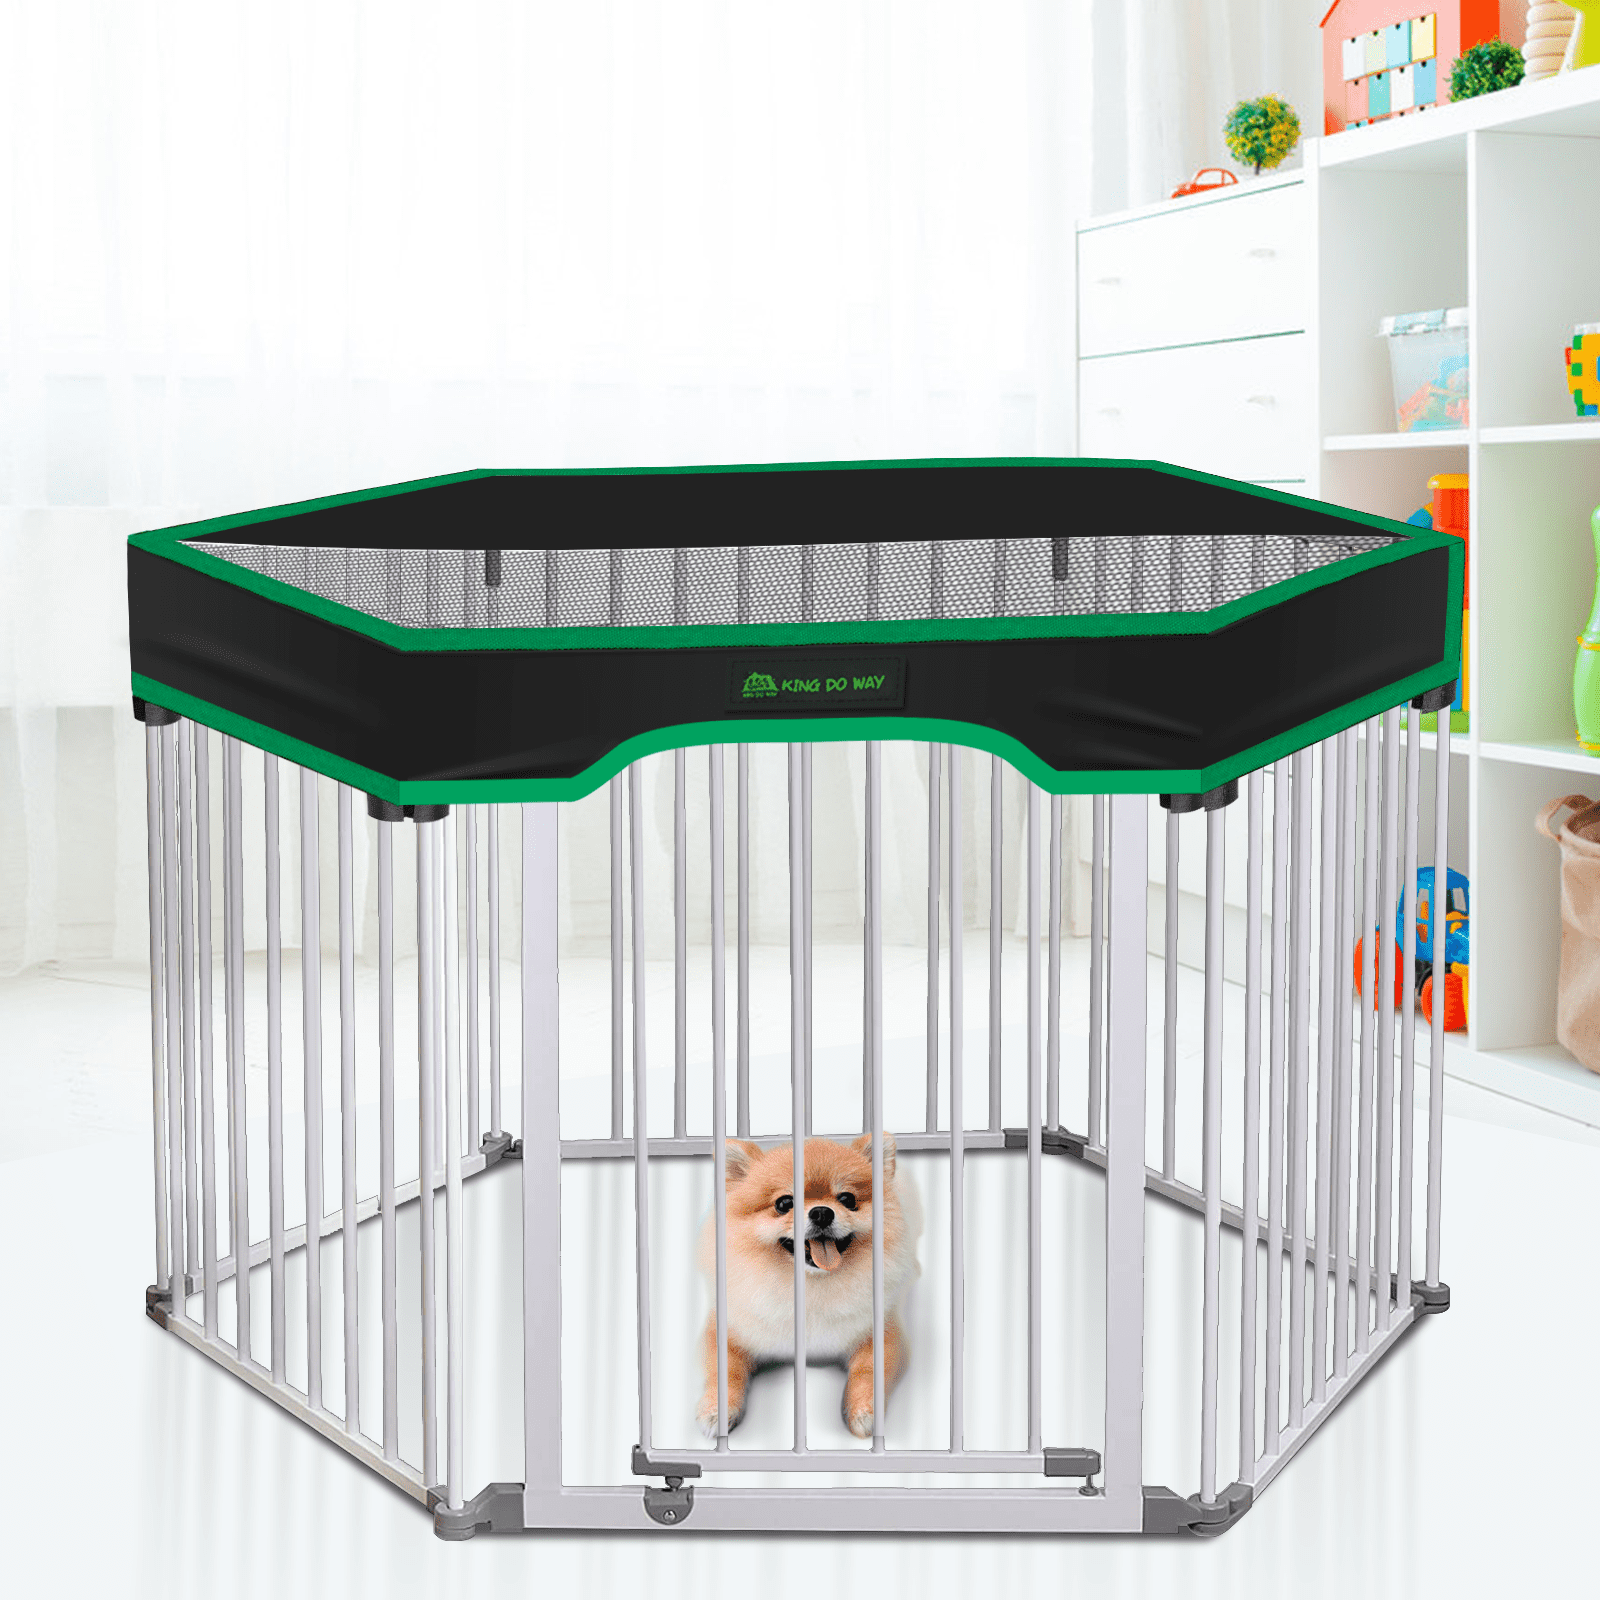 Fits Most 24 Inches Dog Play Pen Playpen Not Included Oiyeefo Pet Playpen Mesh Fabric Top Cover Play Pet Pen Provide Sun Protection for Pets and Prevent Escape 